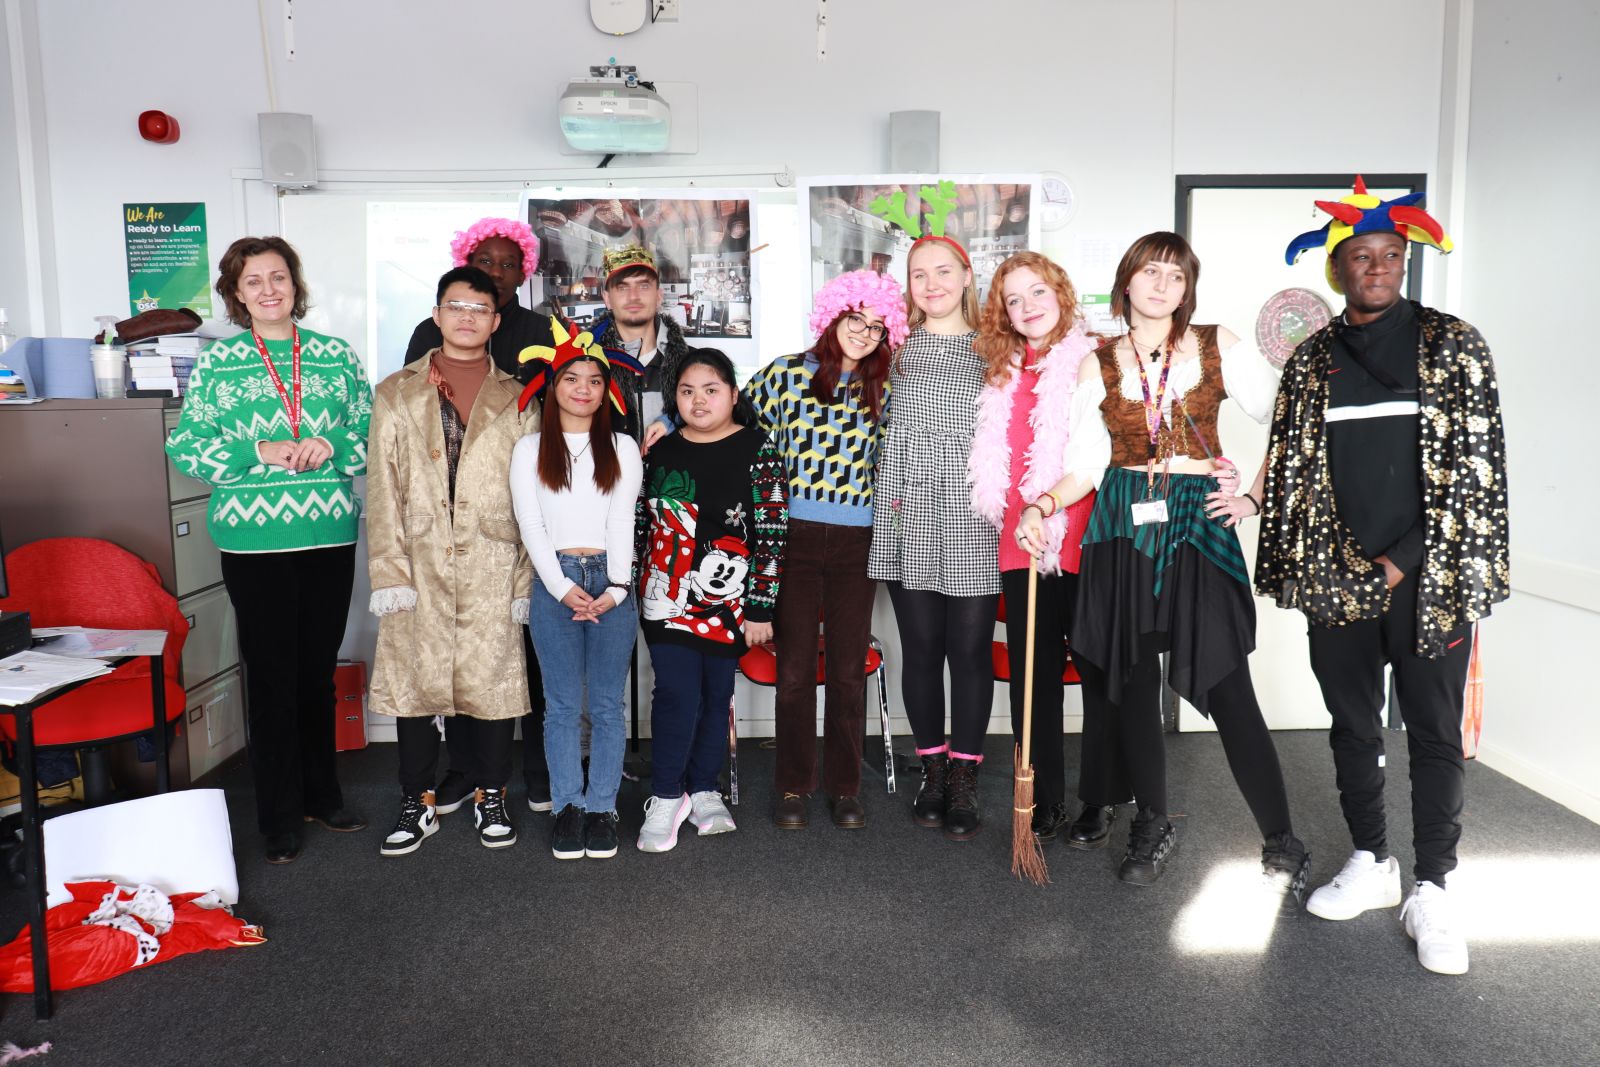 ESOL STUDENTS IN PANTOMIME COSTUMES